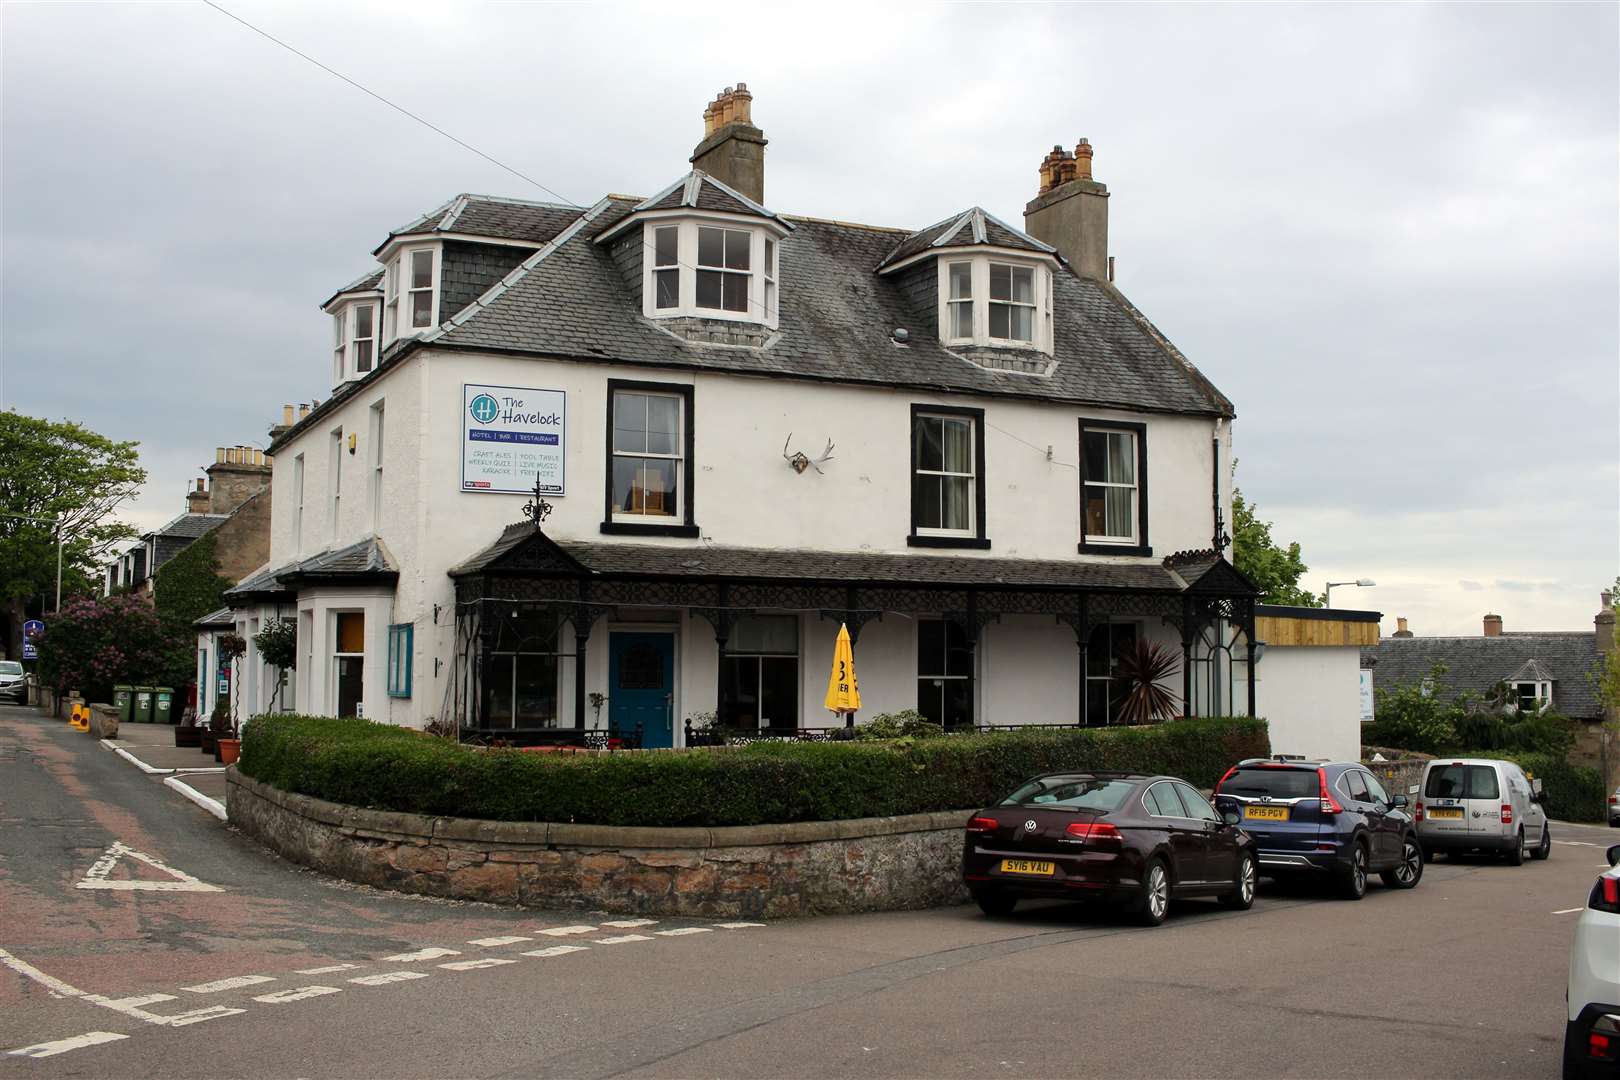 The Havelock Hotel in Nairn pictured in 2019. Picture: Braveheart